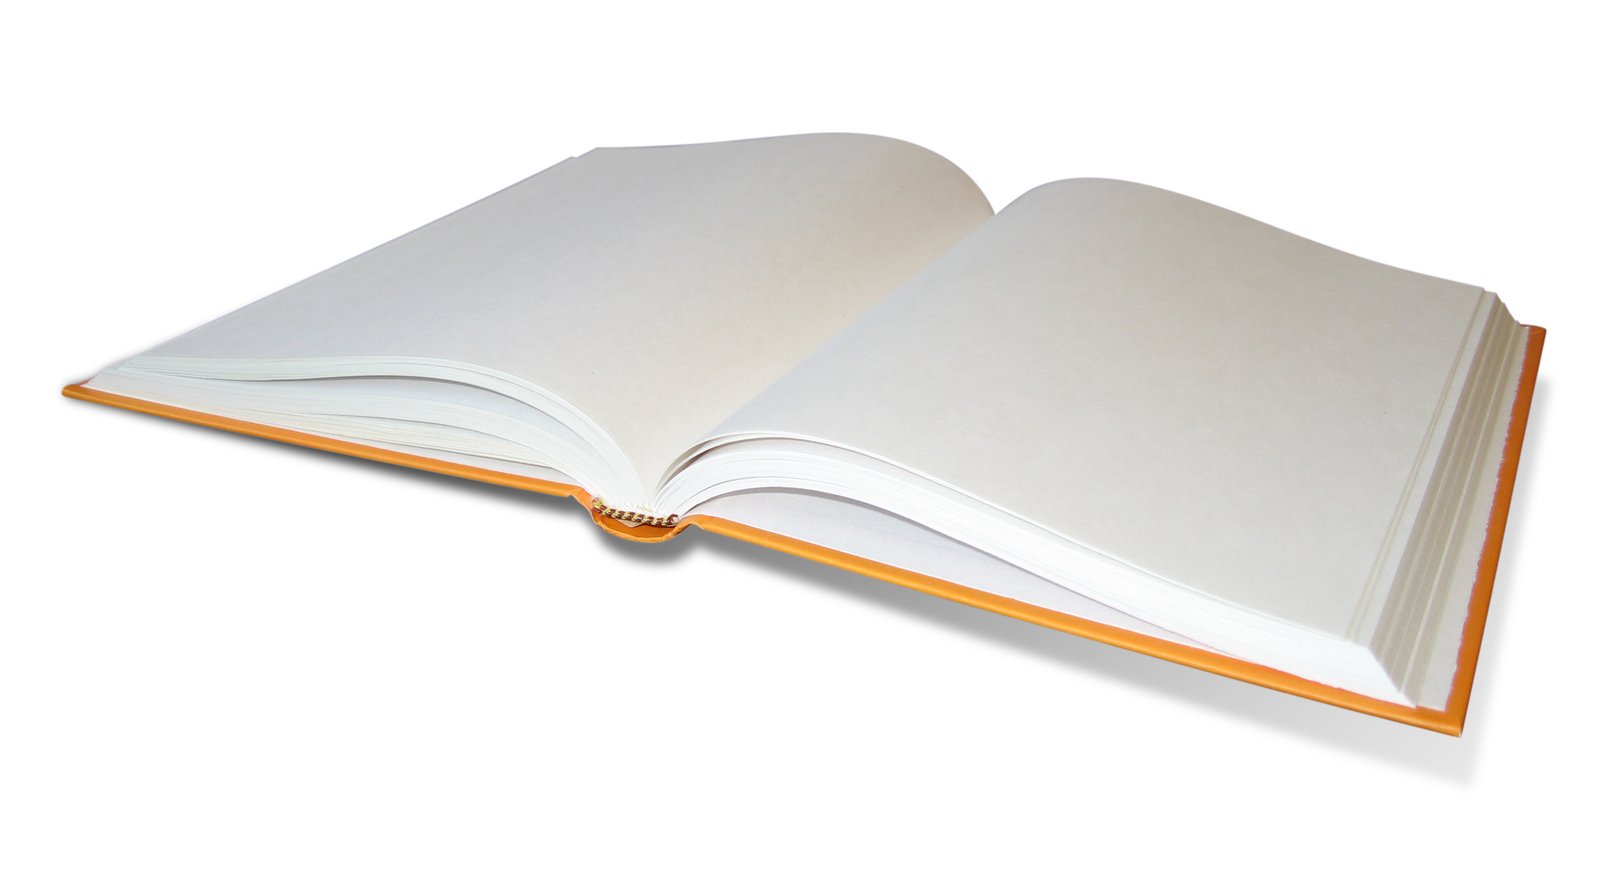 an open book on a white surface